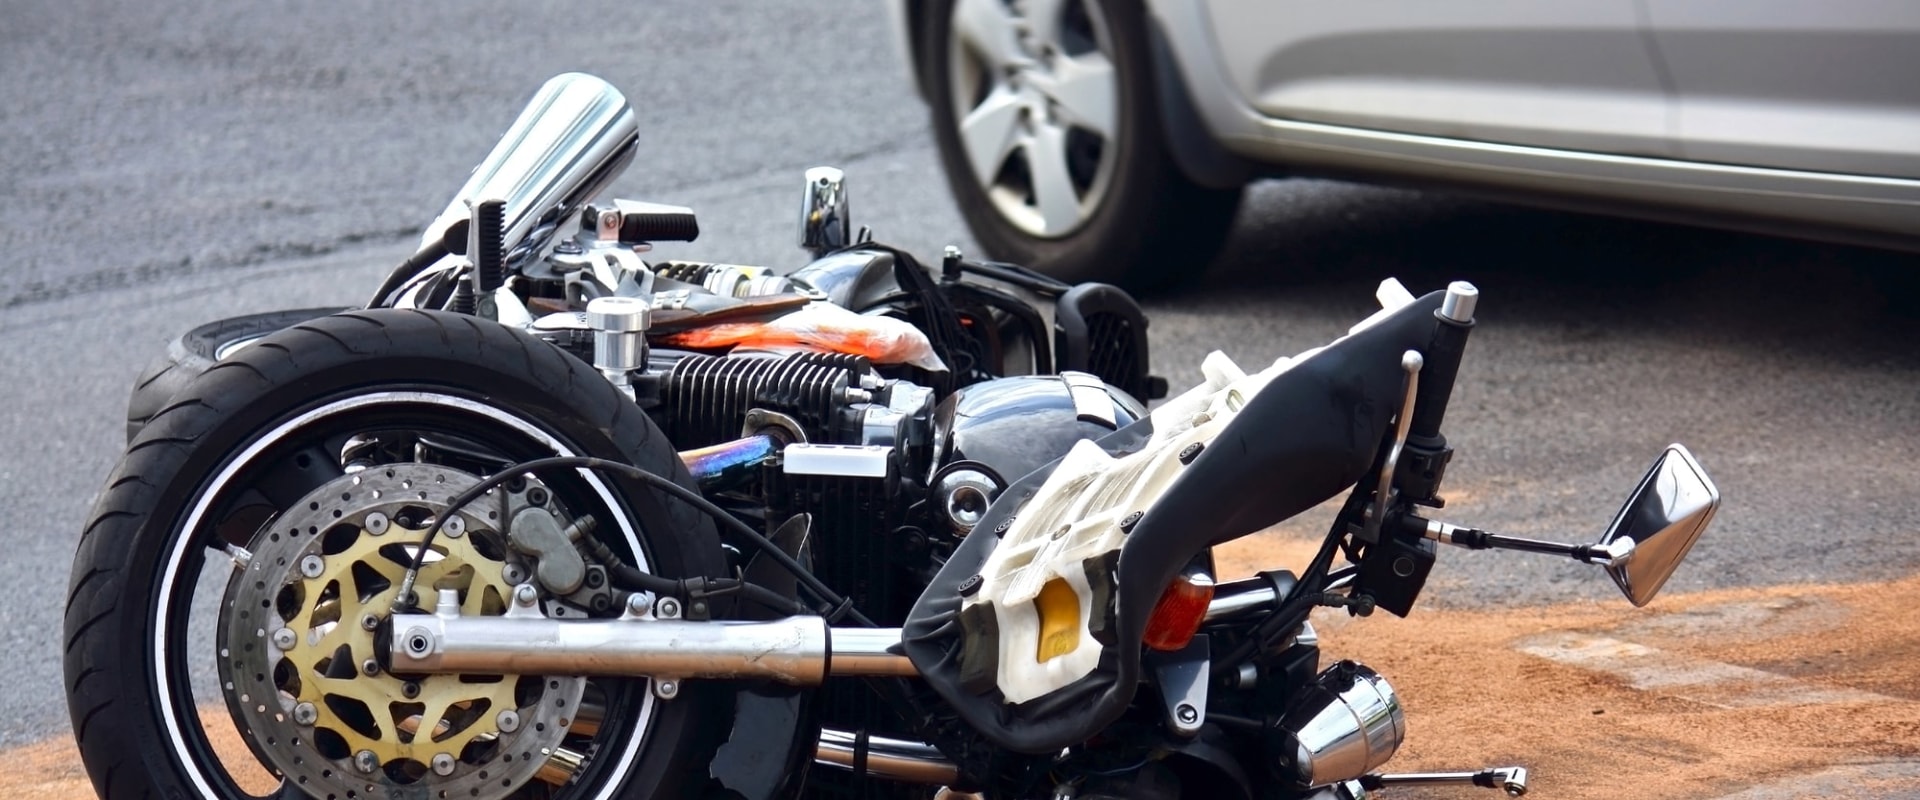 How To File A Sacramento Motorcycle Accident Claim With The US Department Of Labor